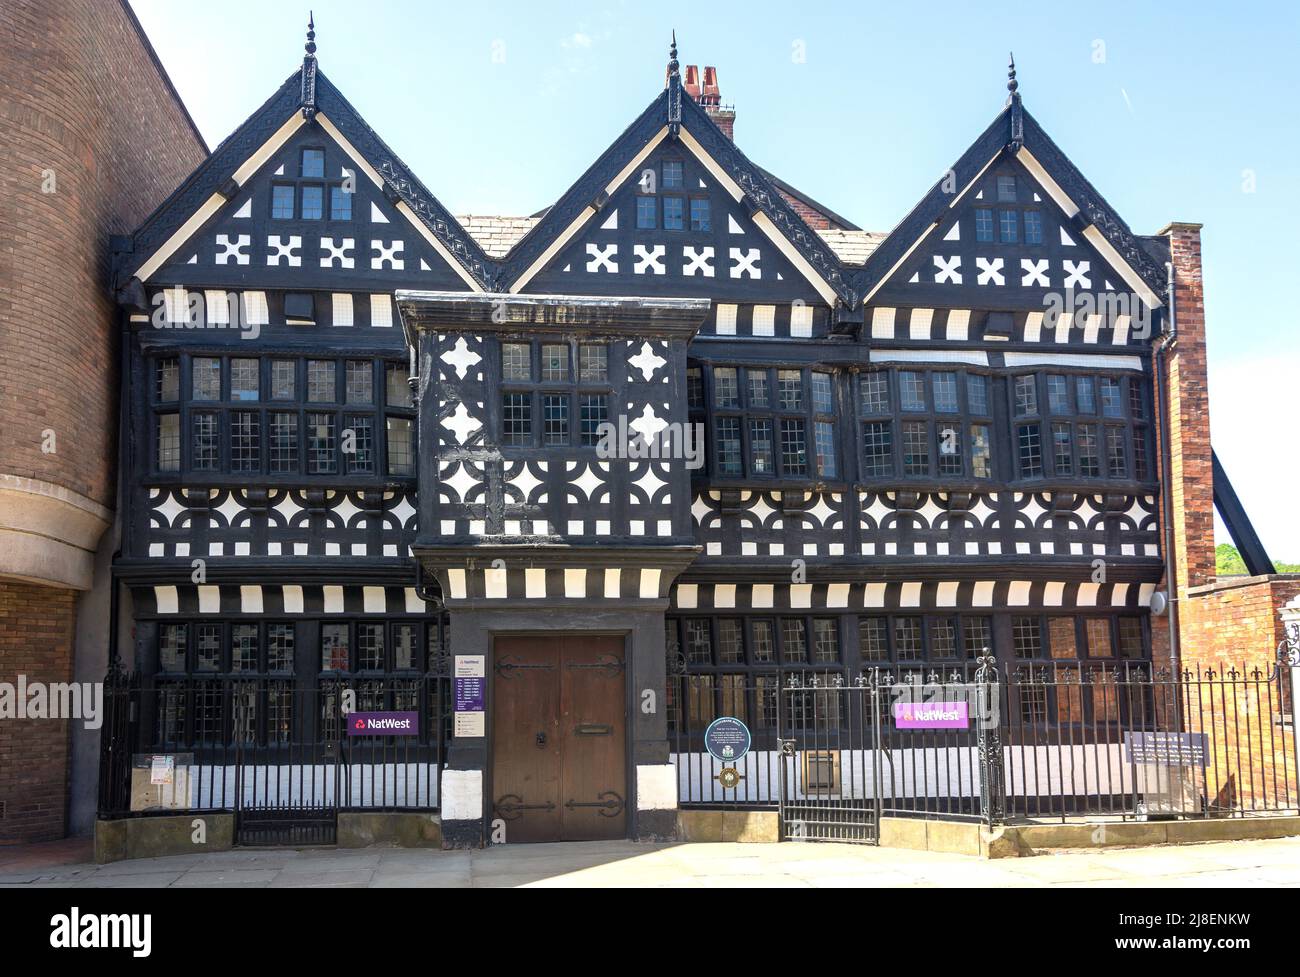 16th Century Underbank Hall (NatWest Bank), Great Underbank, Stockport, Greater Manchester, England, United Kingdom Stock Photo